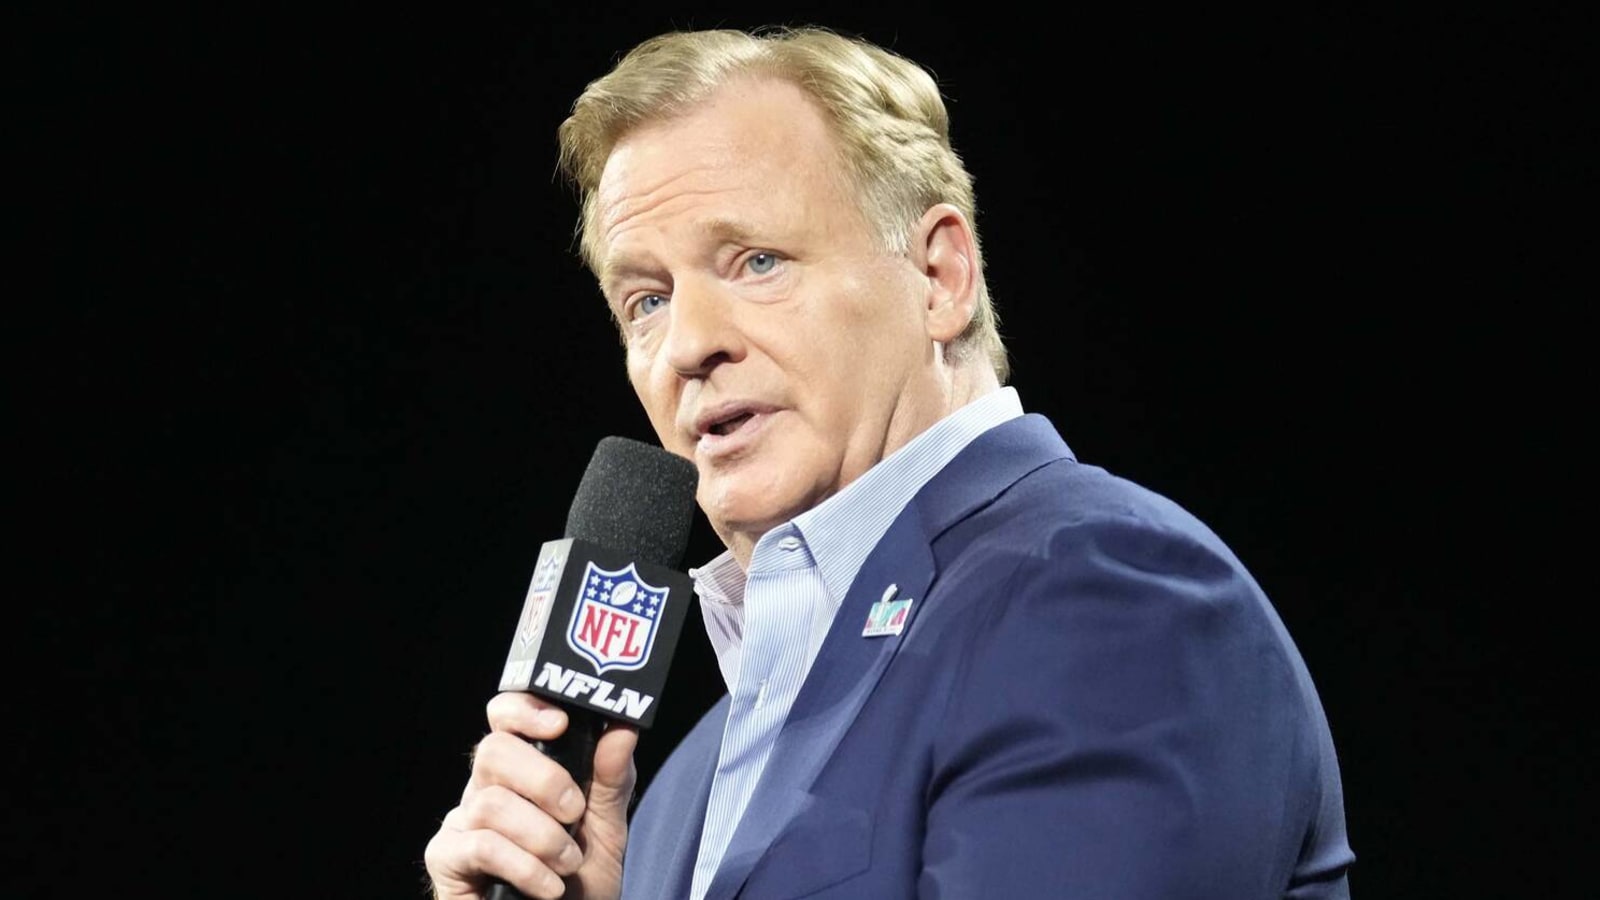 Roger Goodell had awkward celebration with Chiefs player after Super Bowl